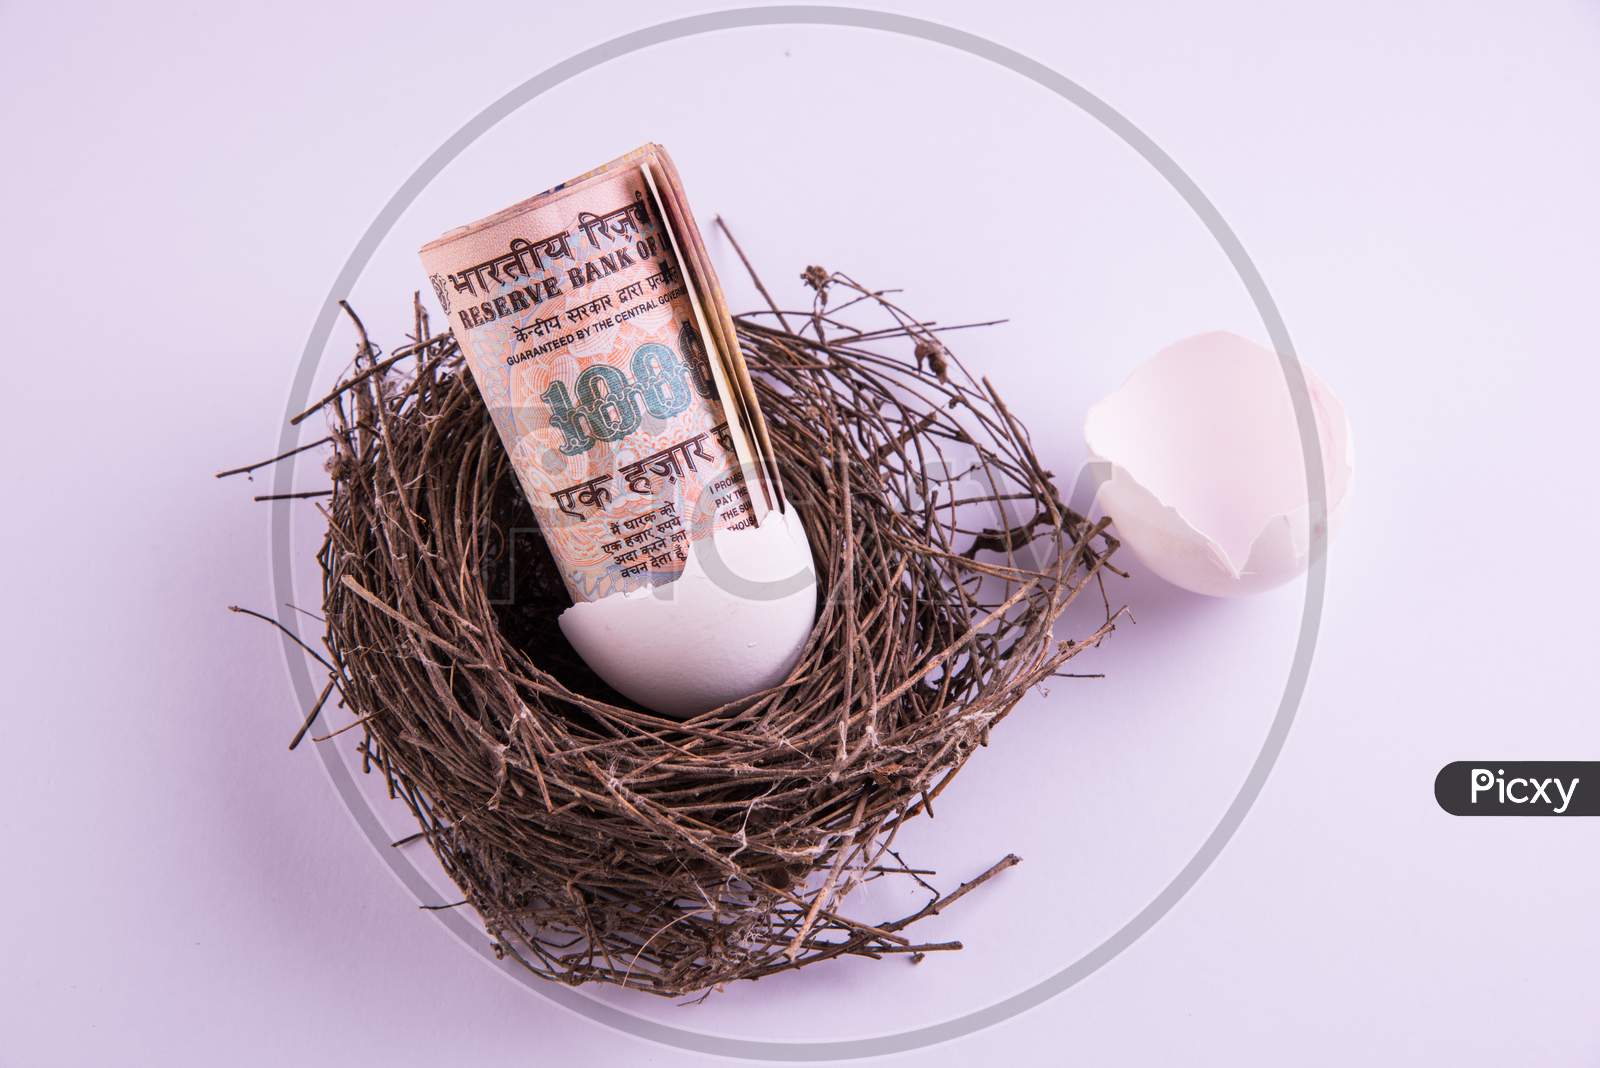 One thousand indian rupee note Coming Out from a Broken Egg in the Nest Against White Background